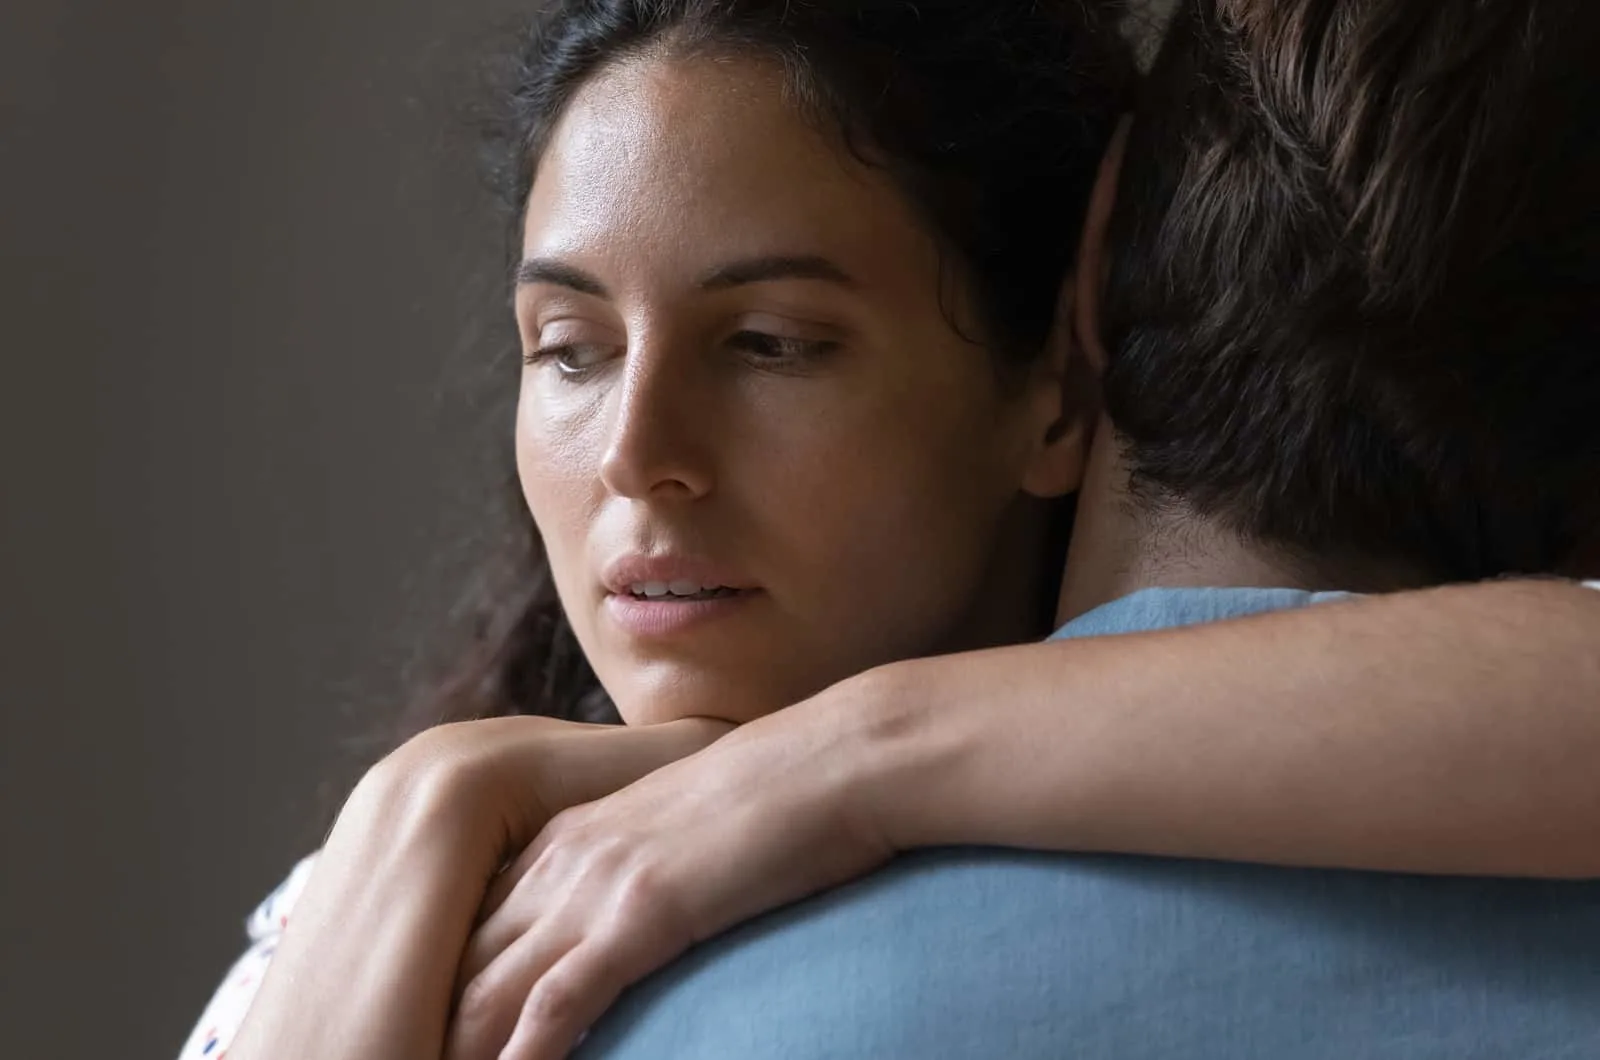 woman hugging her partner with a worried expression